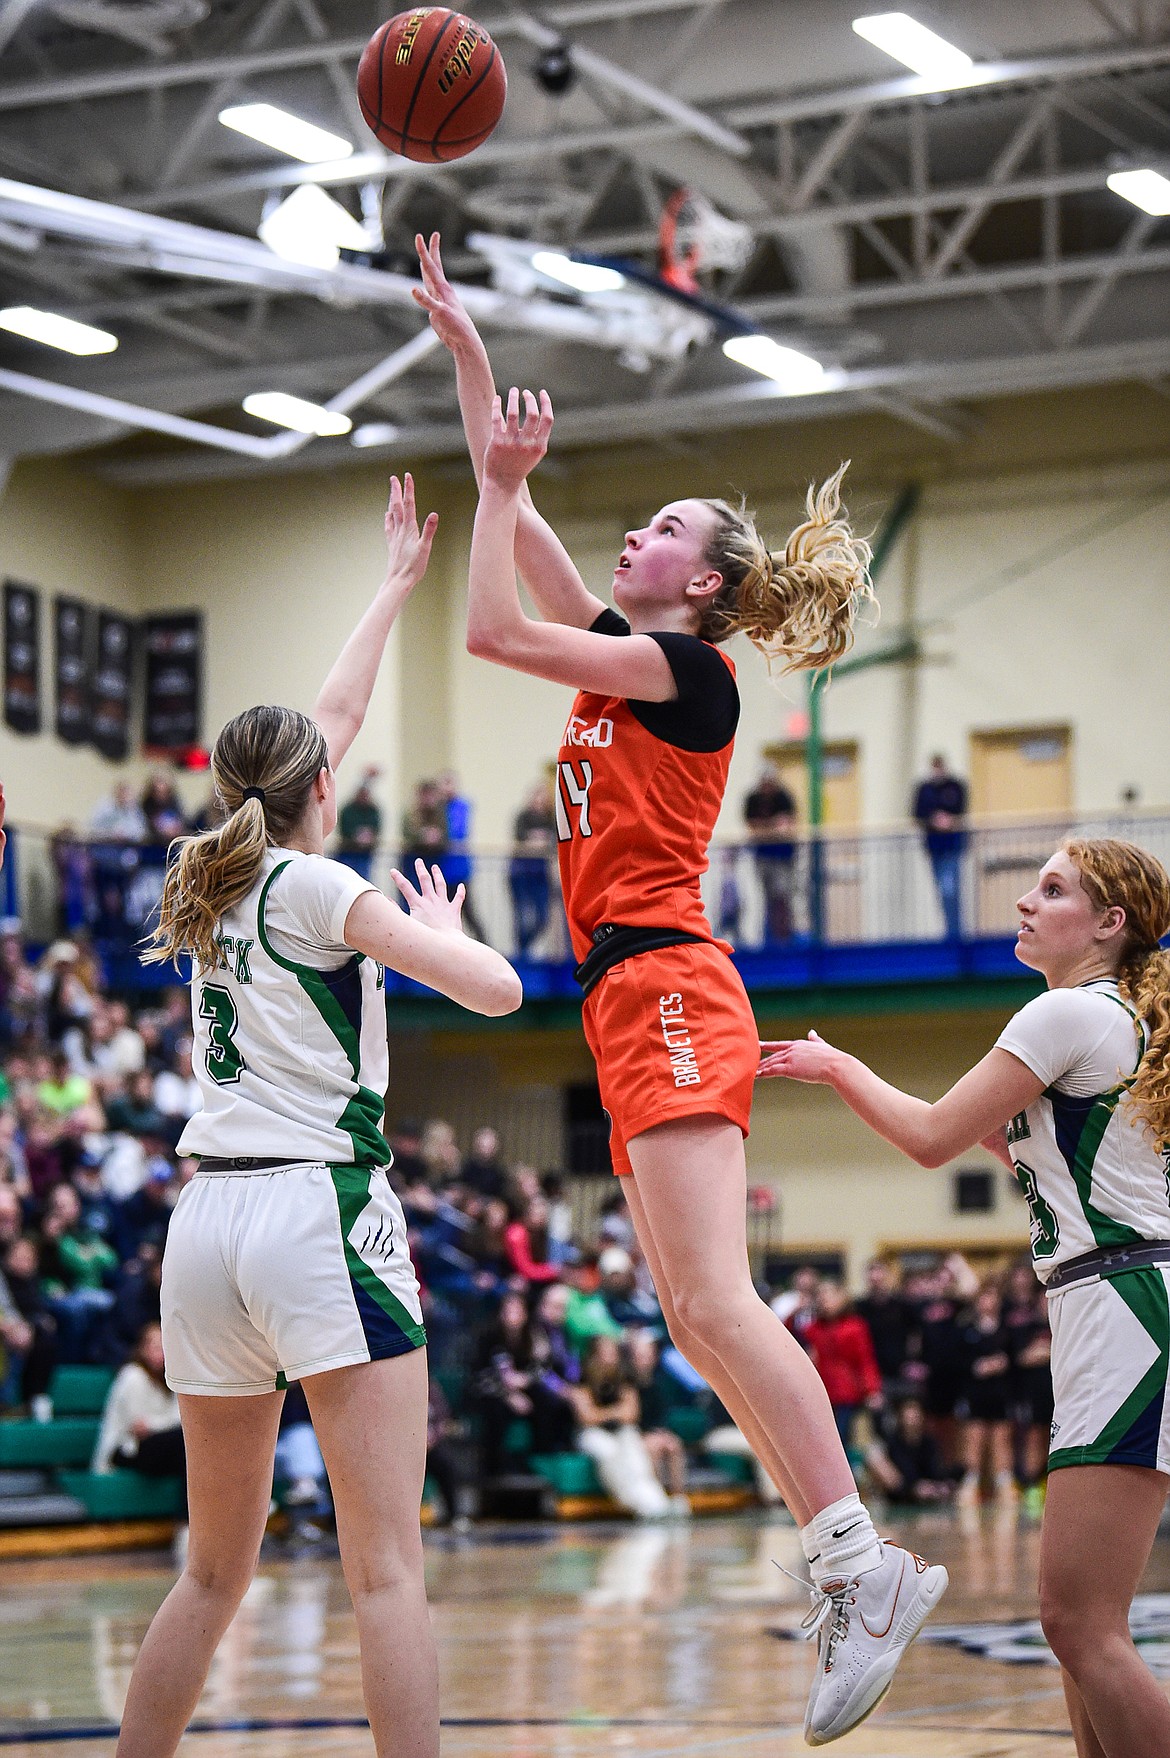 Flathead's Kennedy Moore (14) knocks down a jumper to take the lead late in the fourth quarter against Glacier at Glacier High School on Thursday, Feb. 1. (Casey Kreider/Daily Inter Lake)